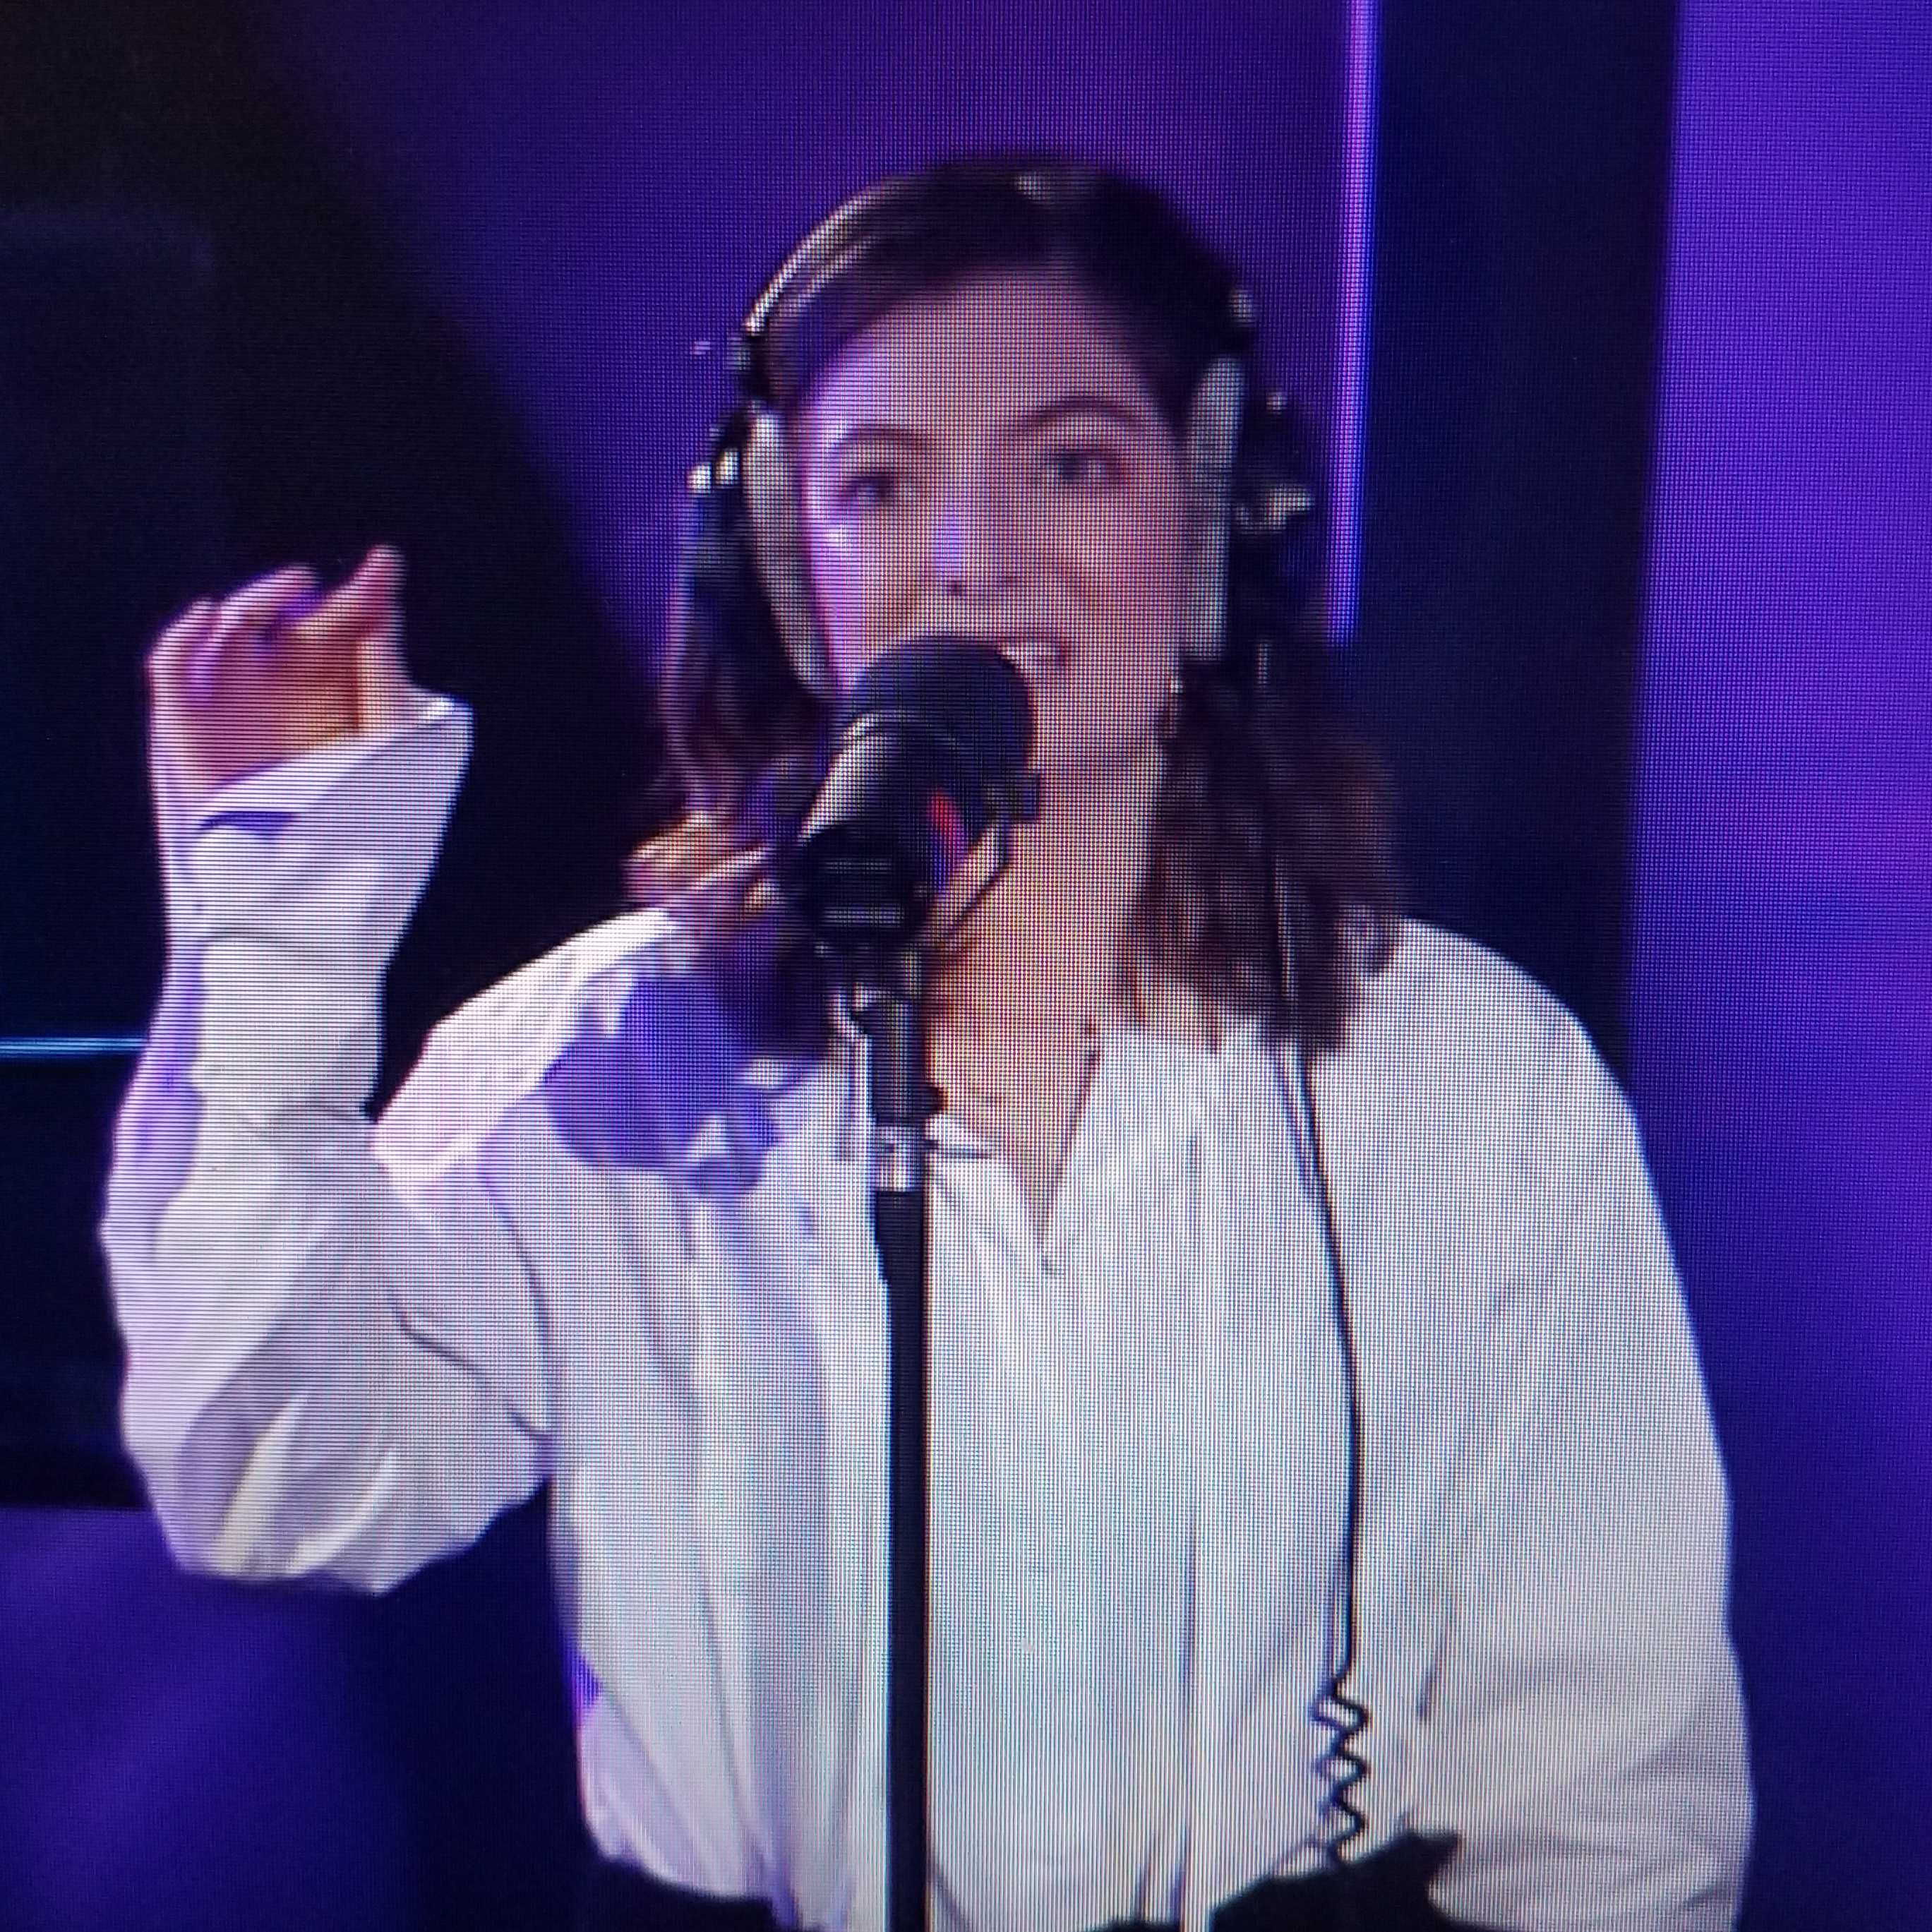 GET YOUR NERD ON MUSIC NEWS Sep 30, 2017: LORDE COVERS PHIL COLLINS IN THE AIR TONIGHT STUDIO & LIVE